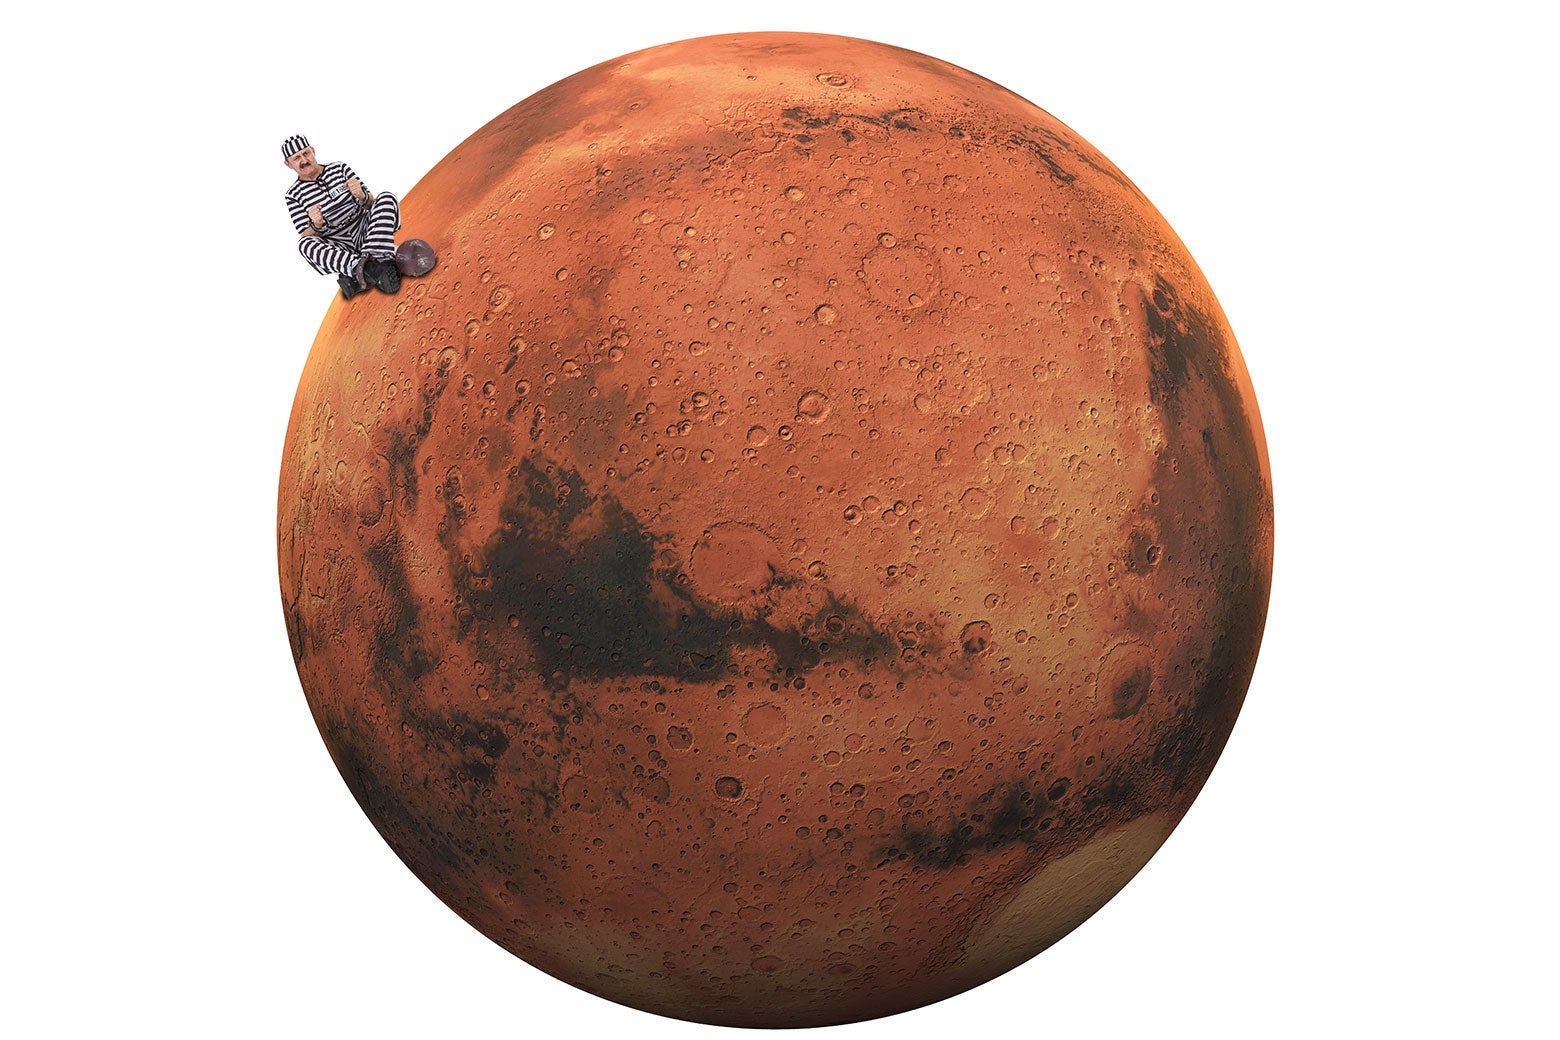 A person in prison clothes sitting on Mars.